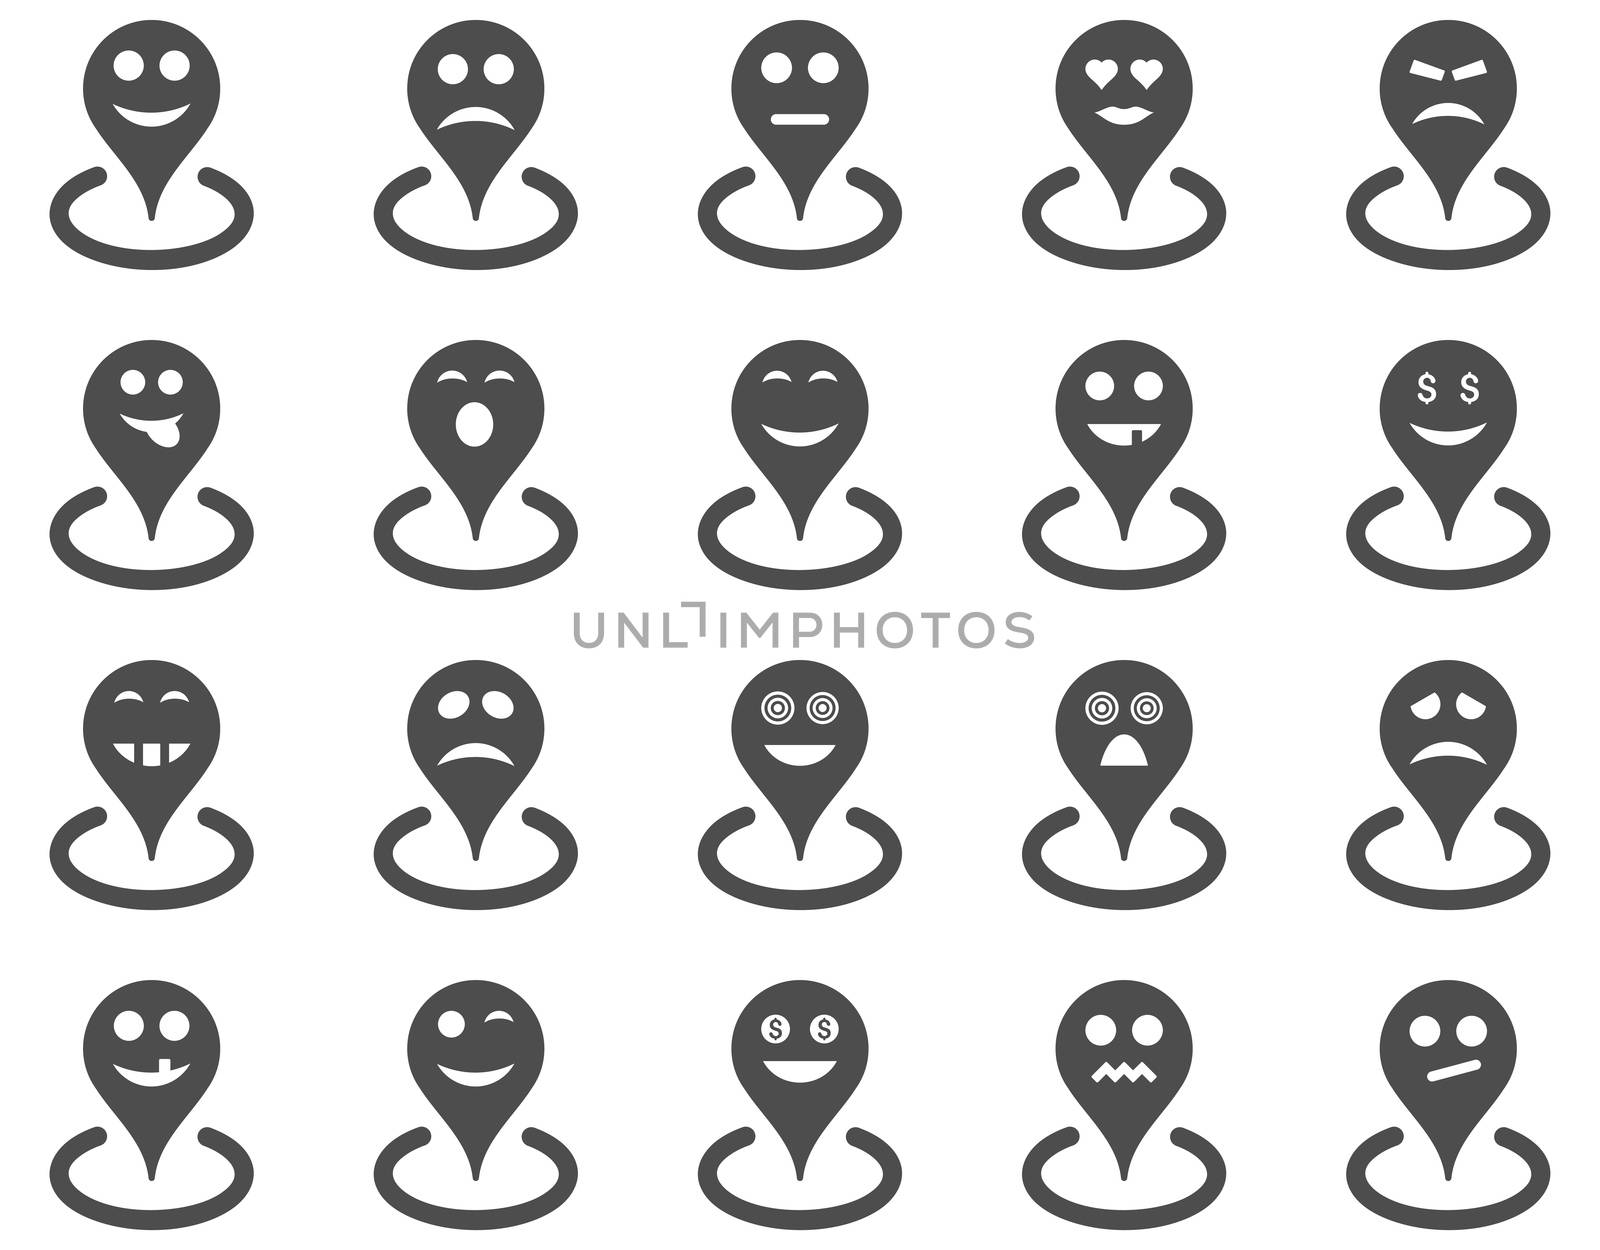 Smiled location icons. Glyph set style is flat images, gray symbols, isolated on a white background.